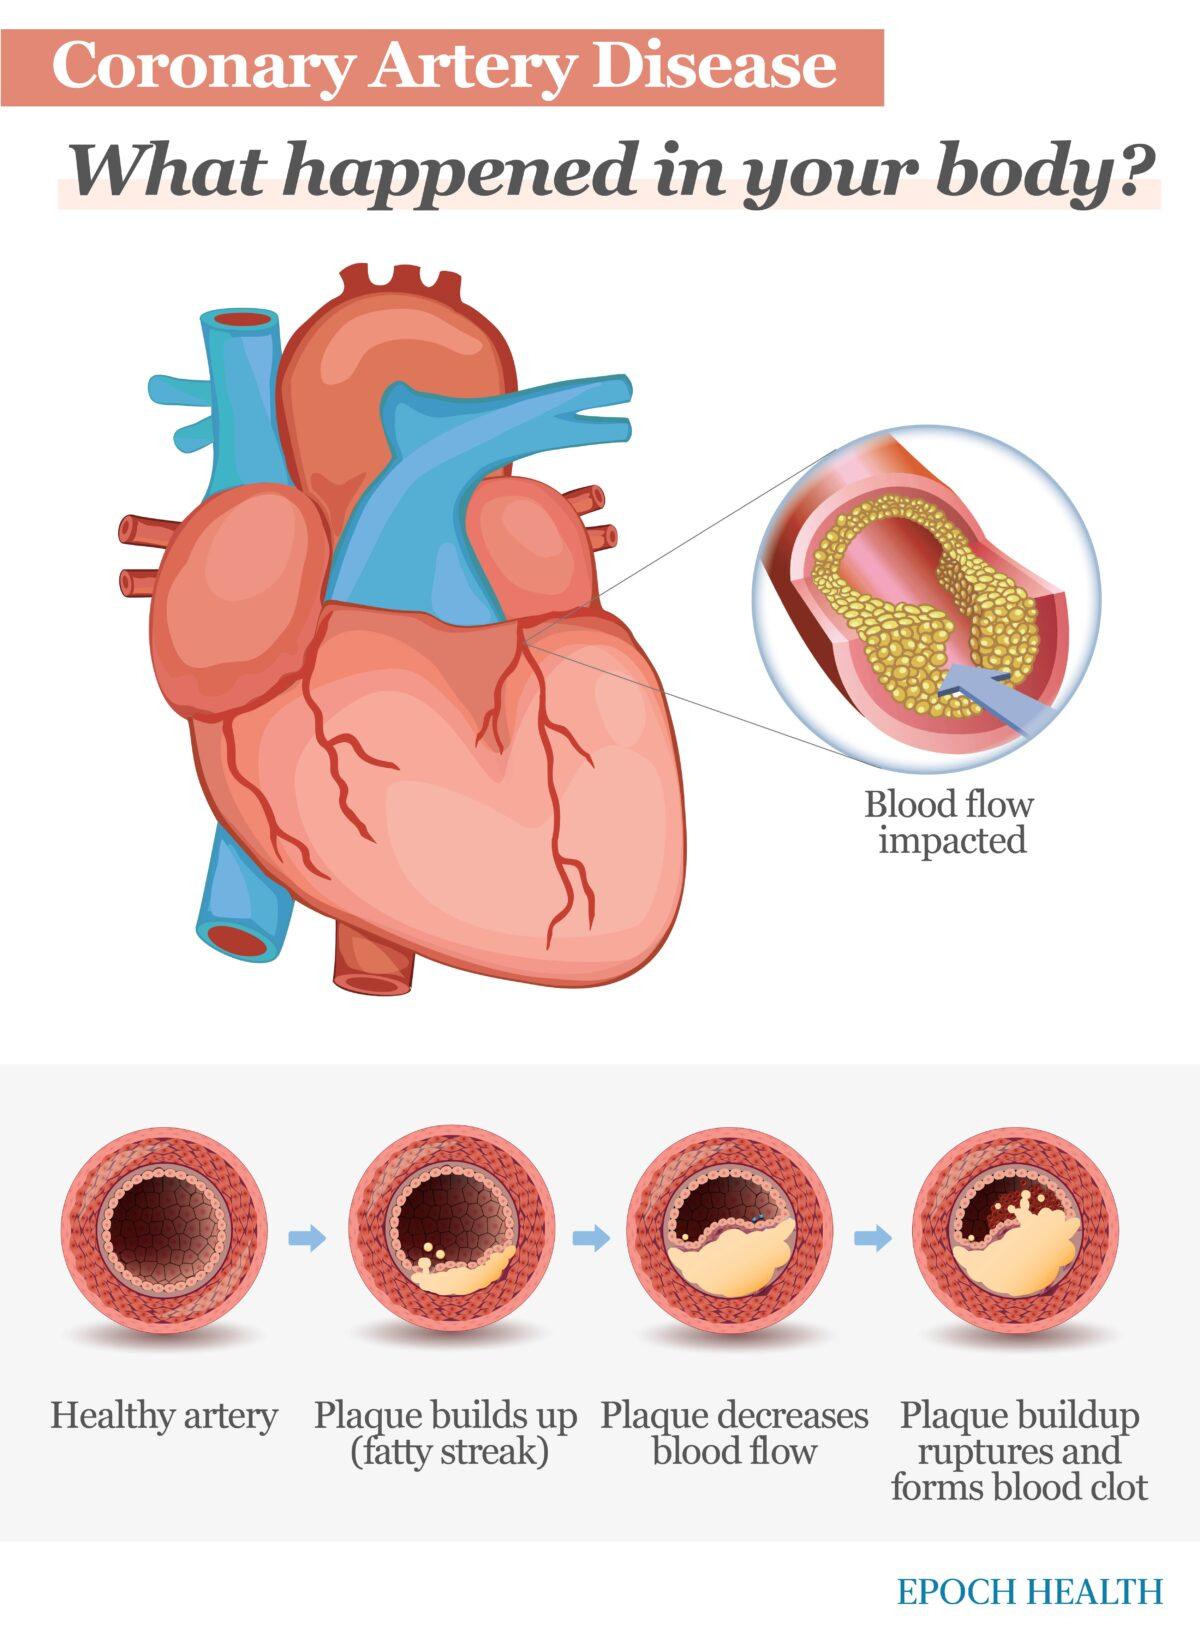 Coronary artery disease is the result of a buildup of plaque in the arteries. (The Epoch Times)